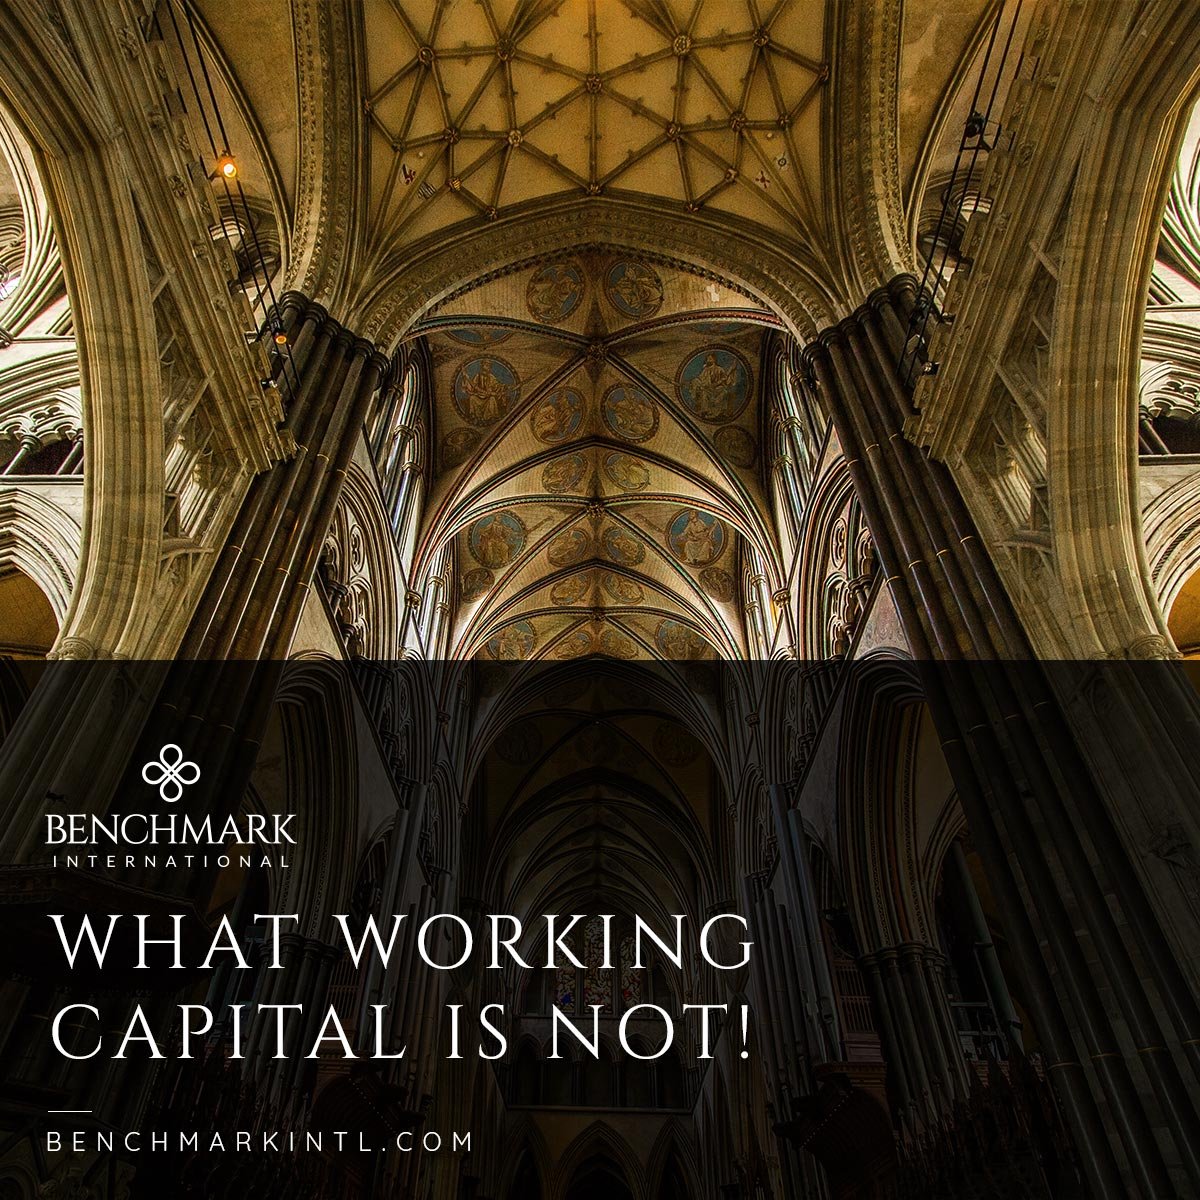 What working capital is not!